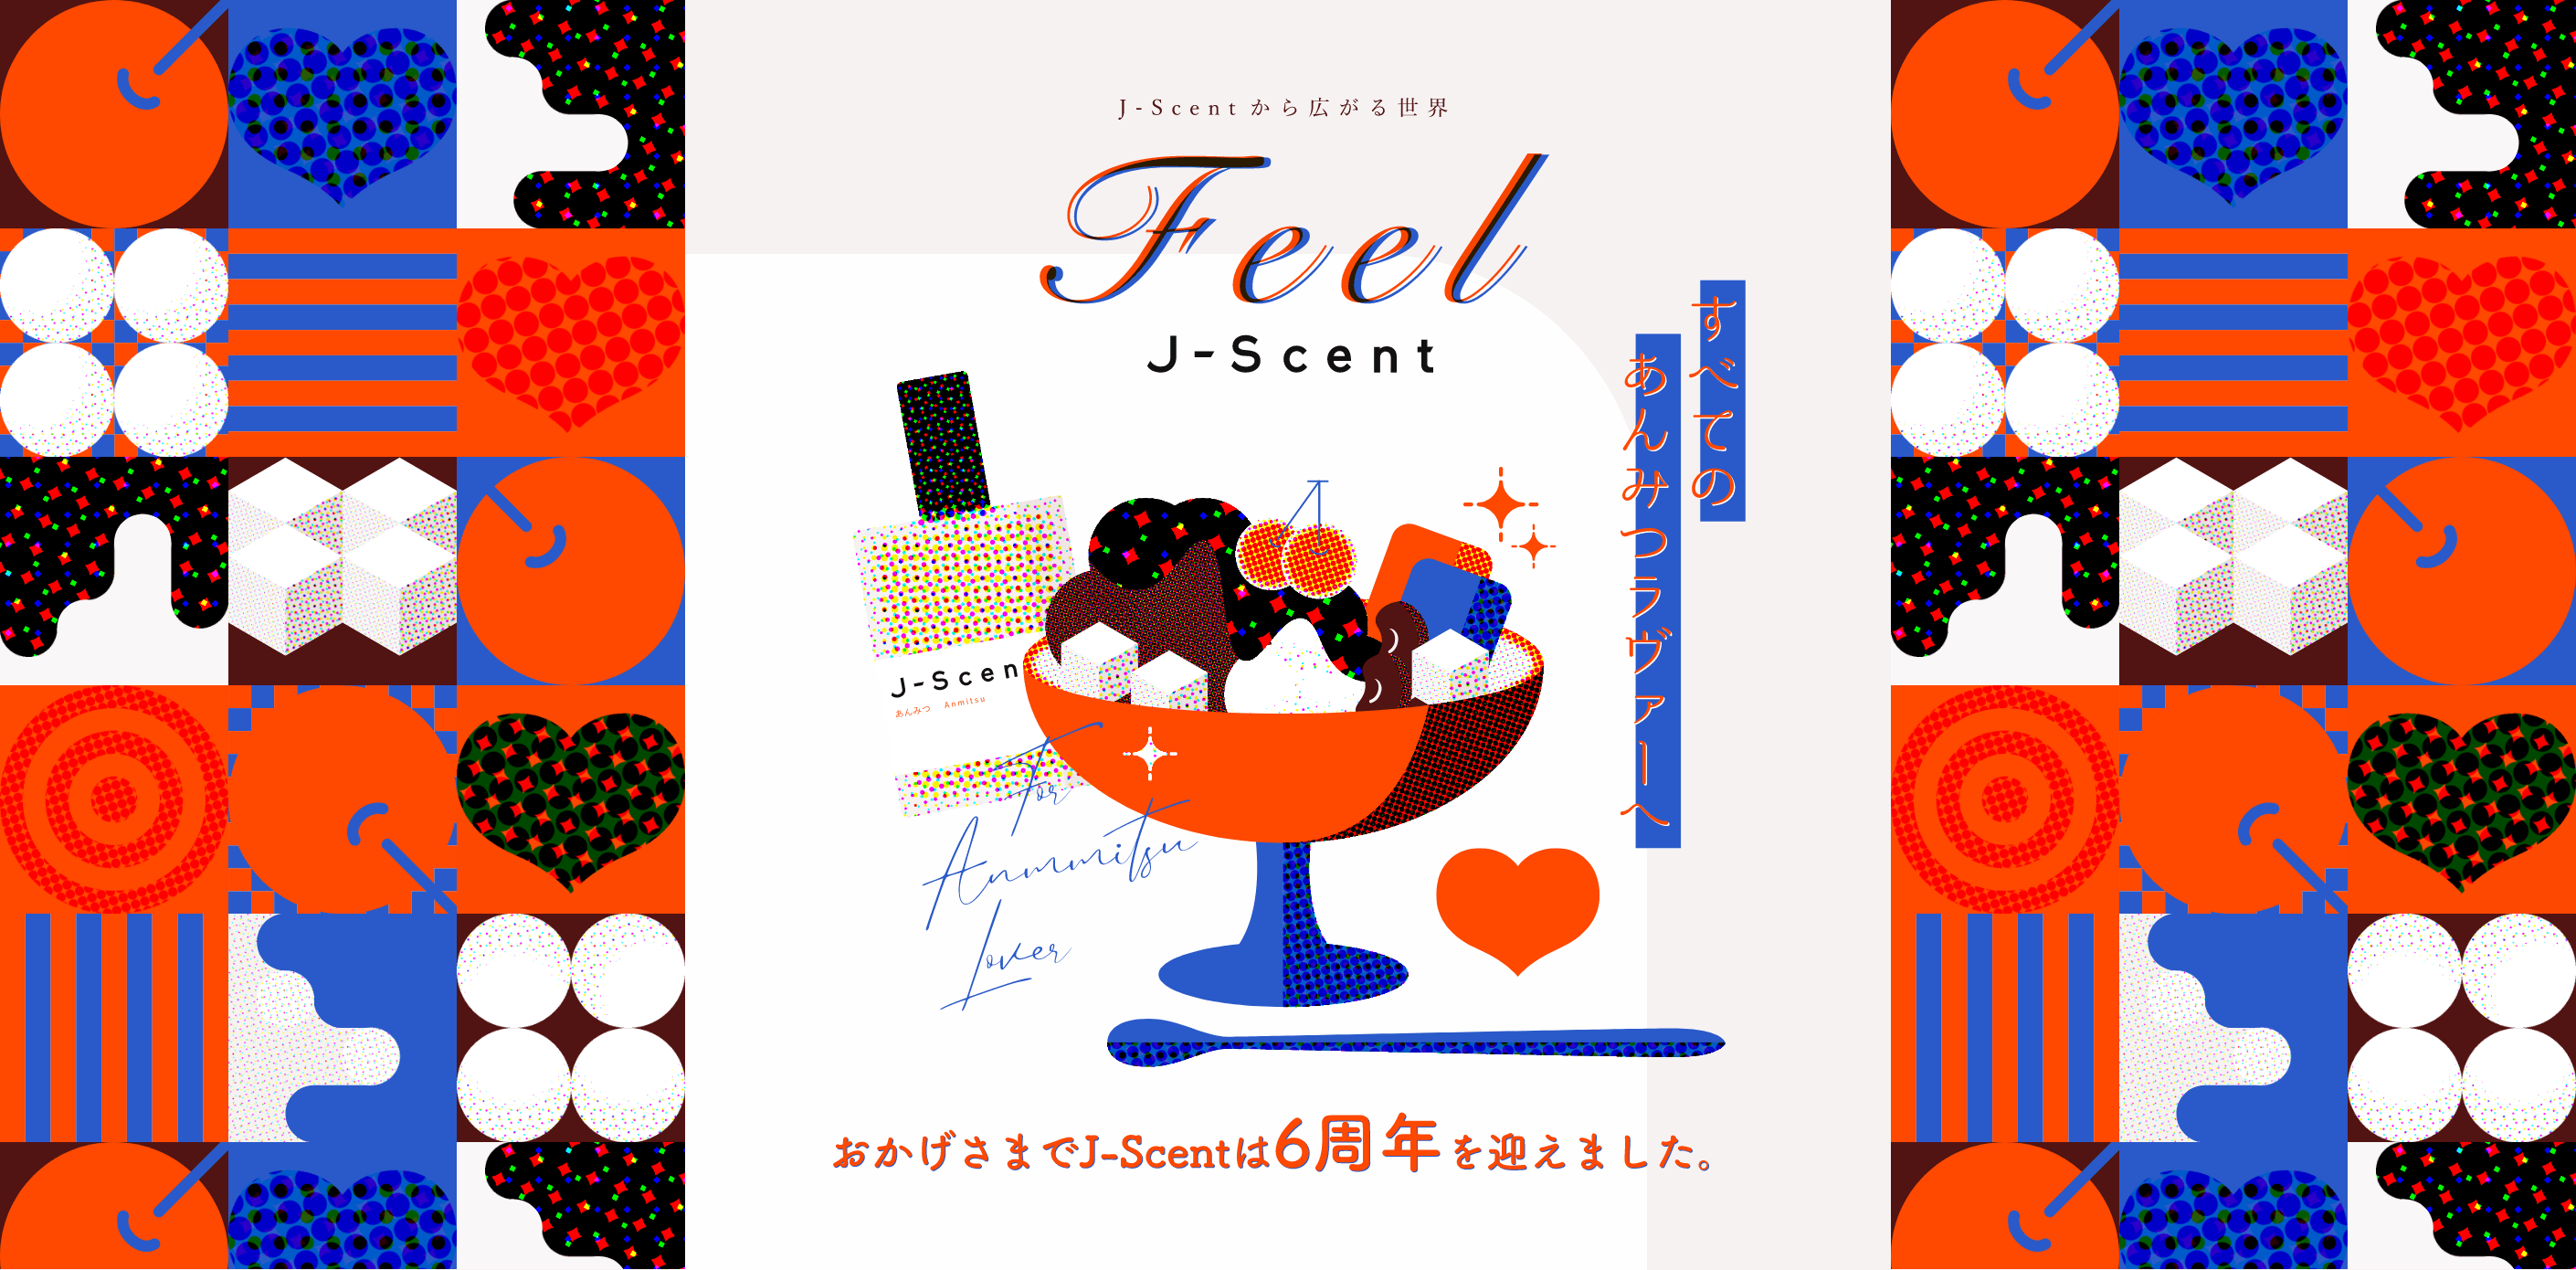 Feel J-Scent 5th project